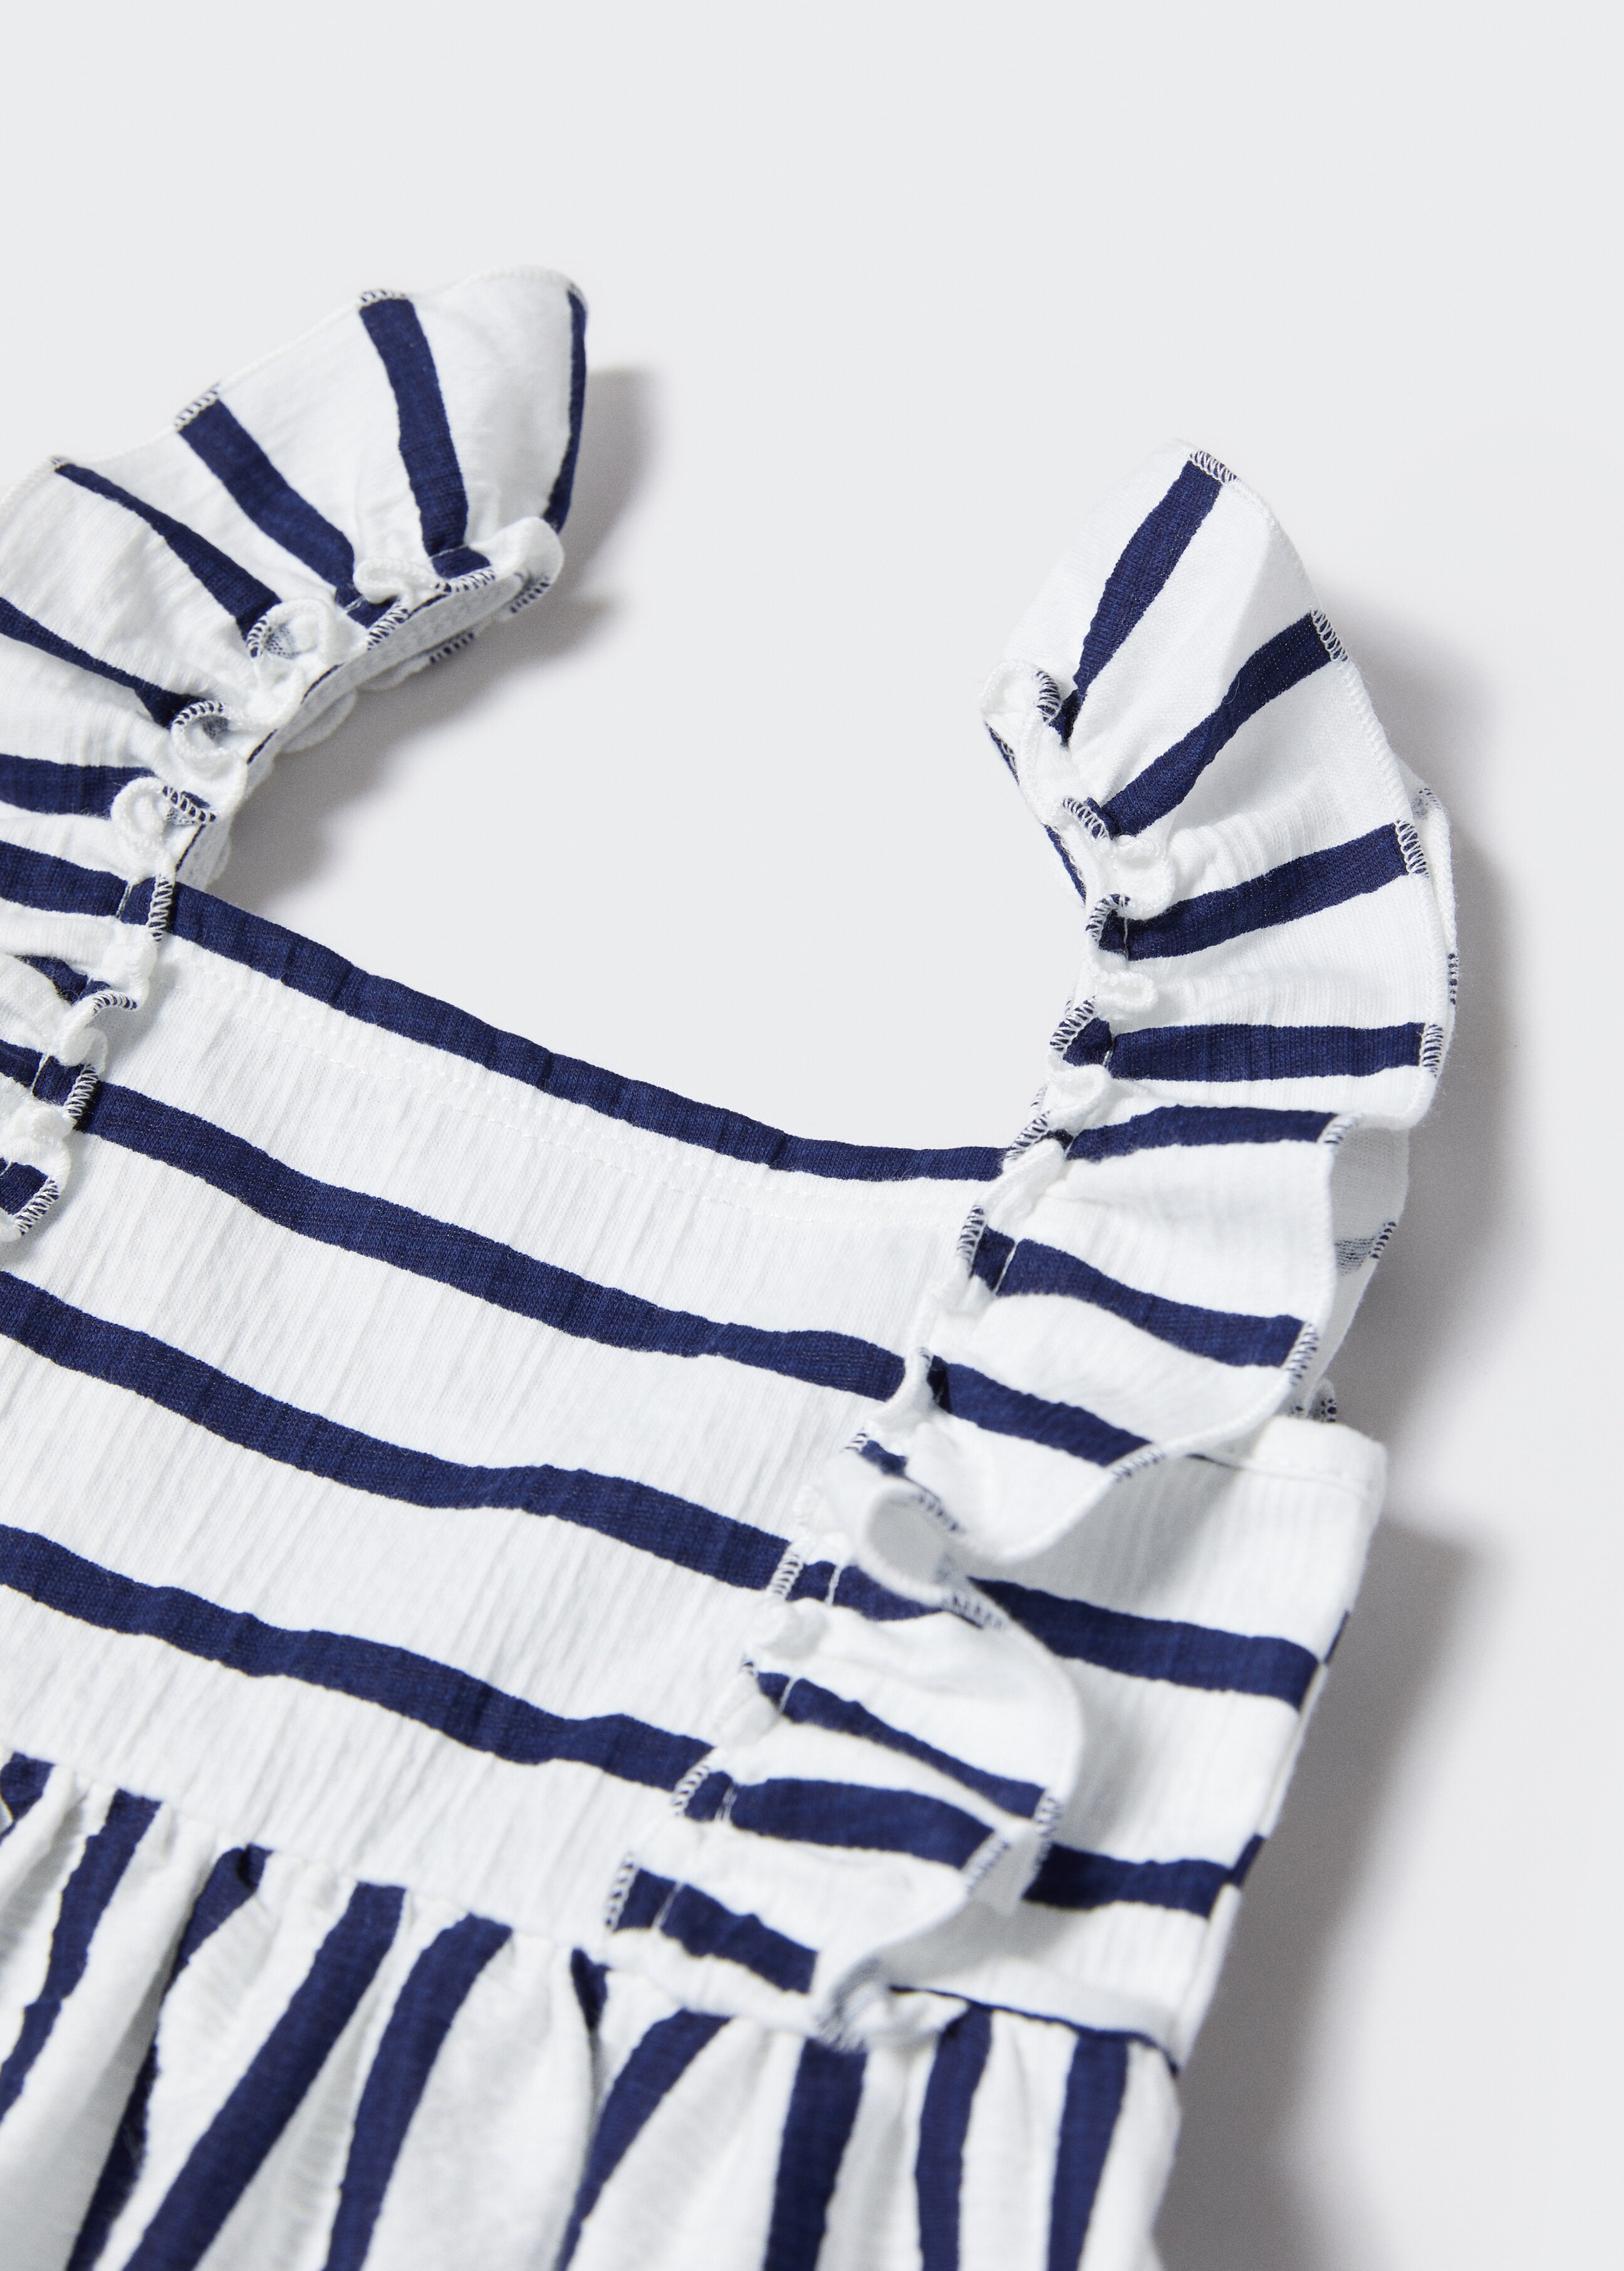 Striped strap dress - Details of the article 8